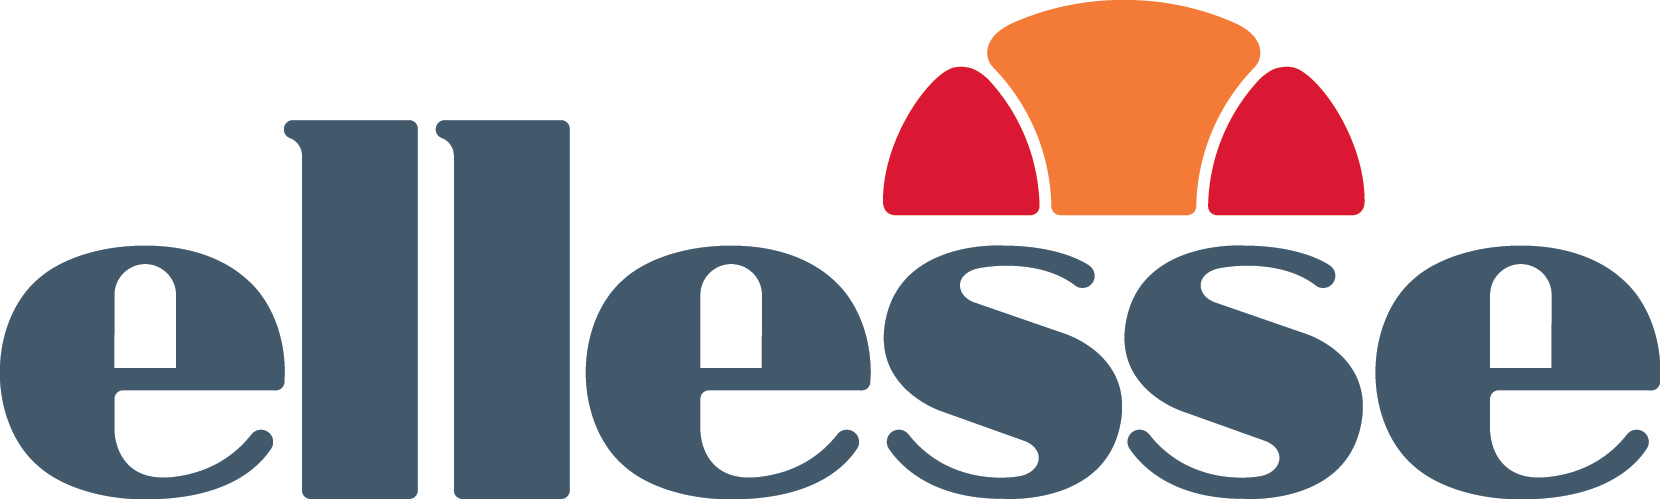 Italian Sports Apparel Logo - I almost forgot about ellesse, one of my teachers had the logo ...